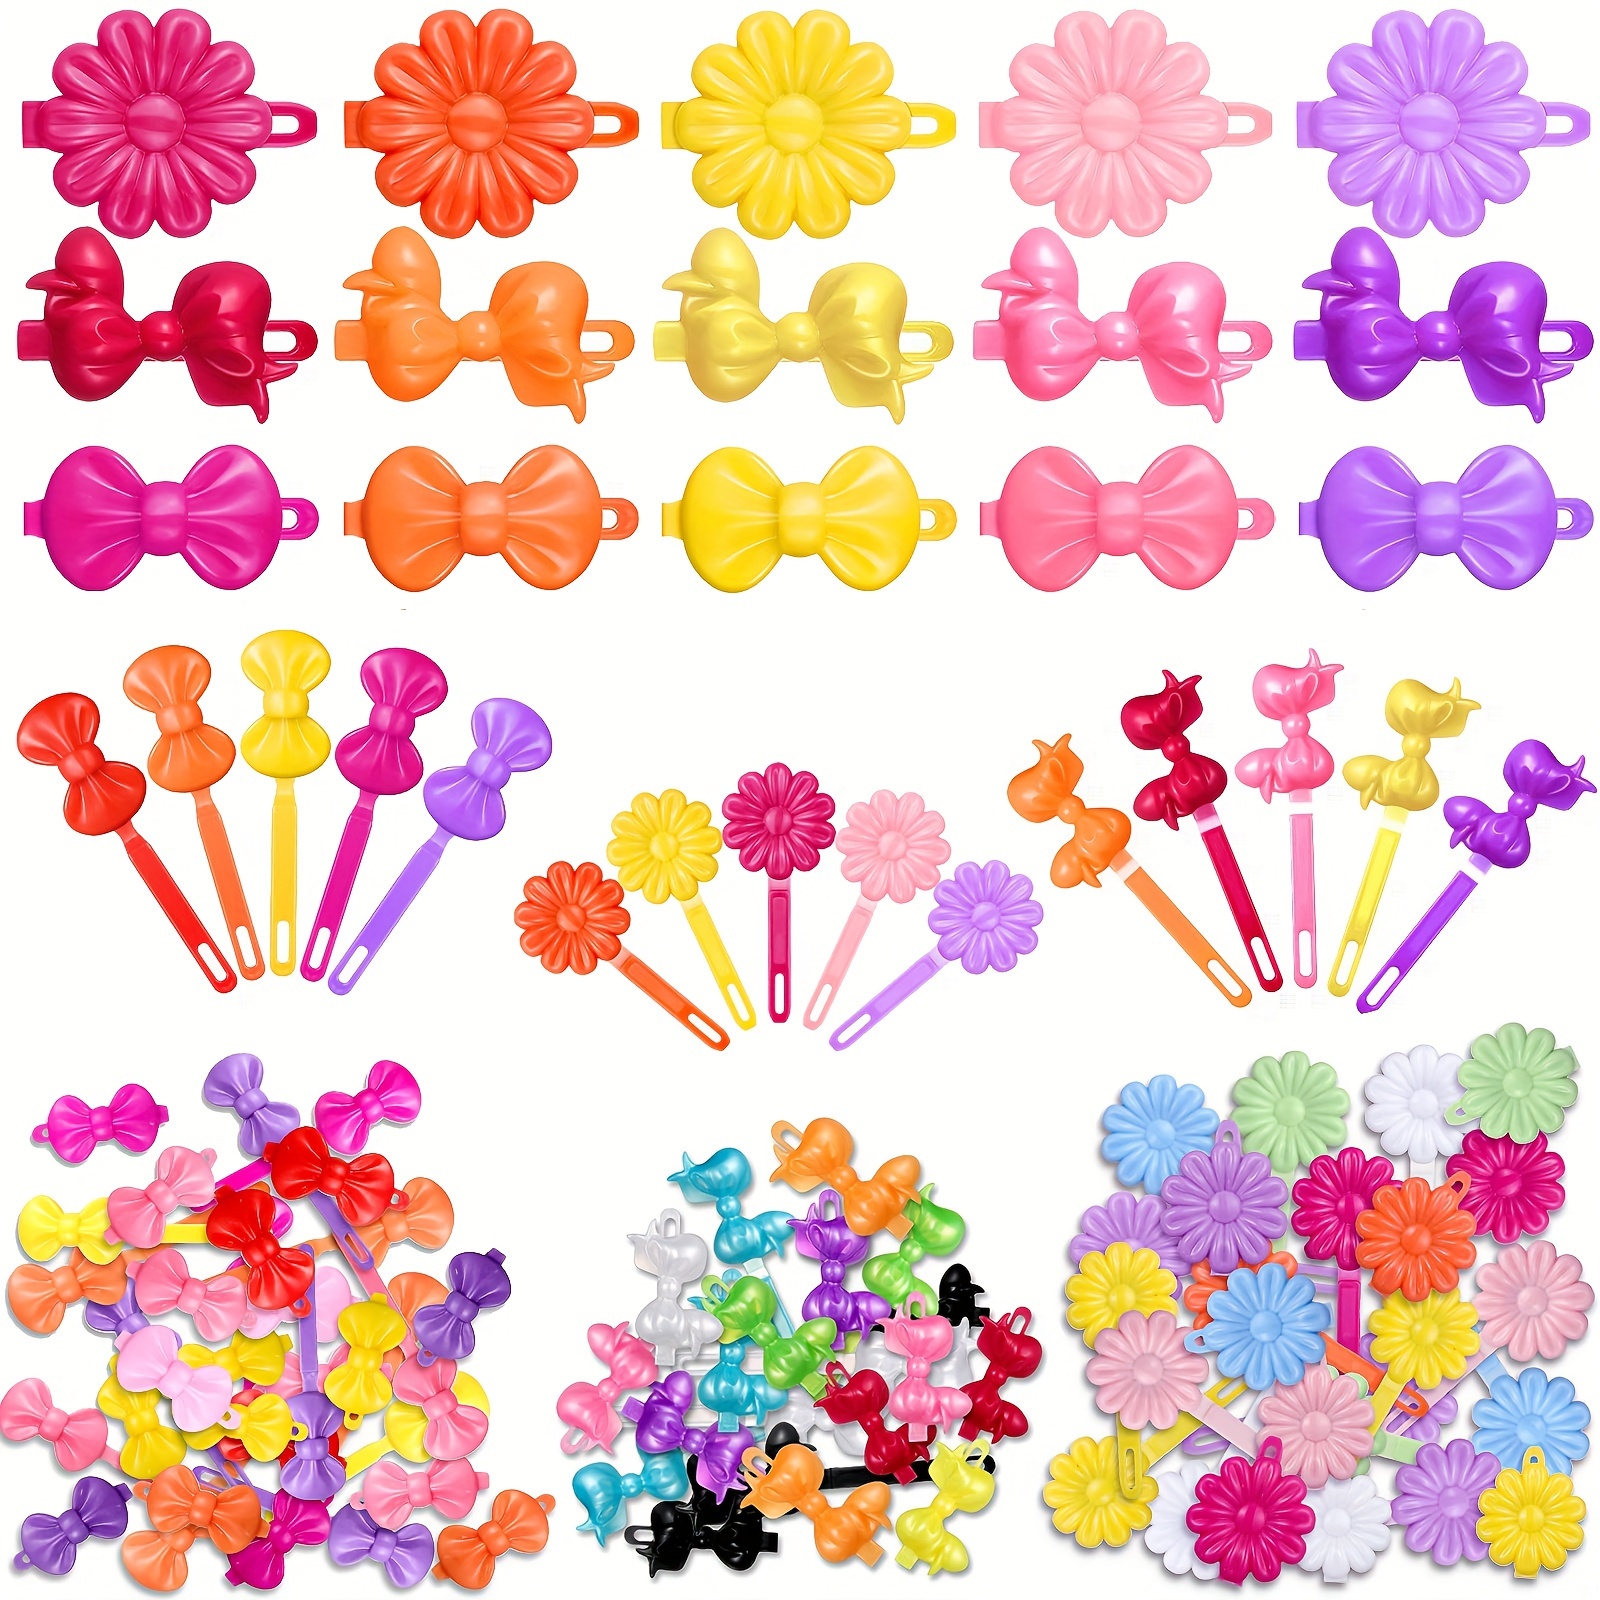 

54-piece Hair Clip Set For Girls - Plastic Self-hinge Barrettes, 80s/90s Cartoon-style Colorful Cute Hairpins, Mother's Day/halloween/christmas/birthday Gifts & Easter Egg Fillers (random Colors)